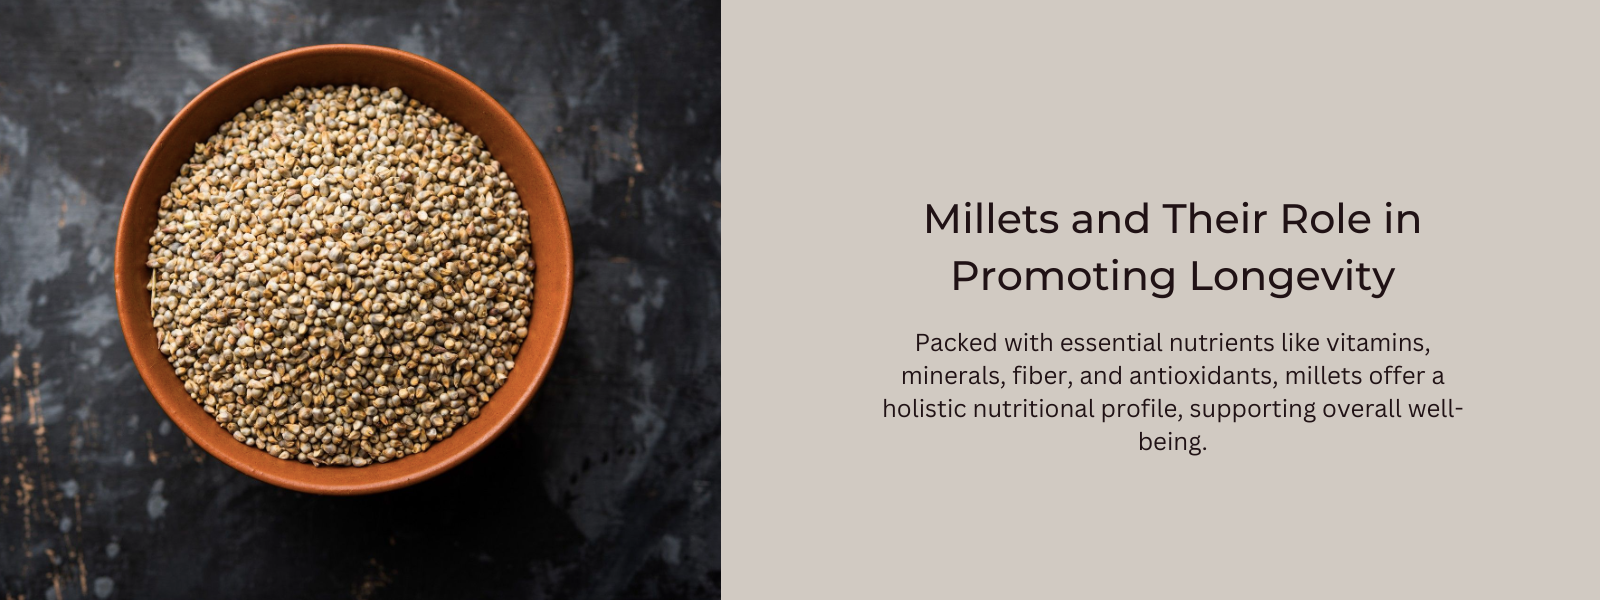 Millets and Their Role in Promoting Longevity